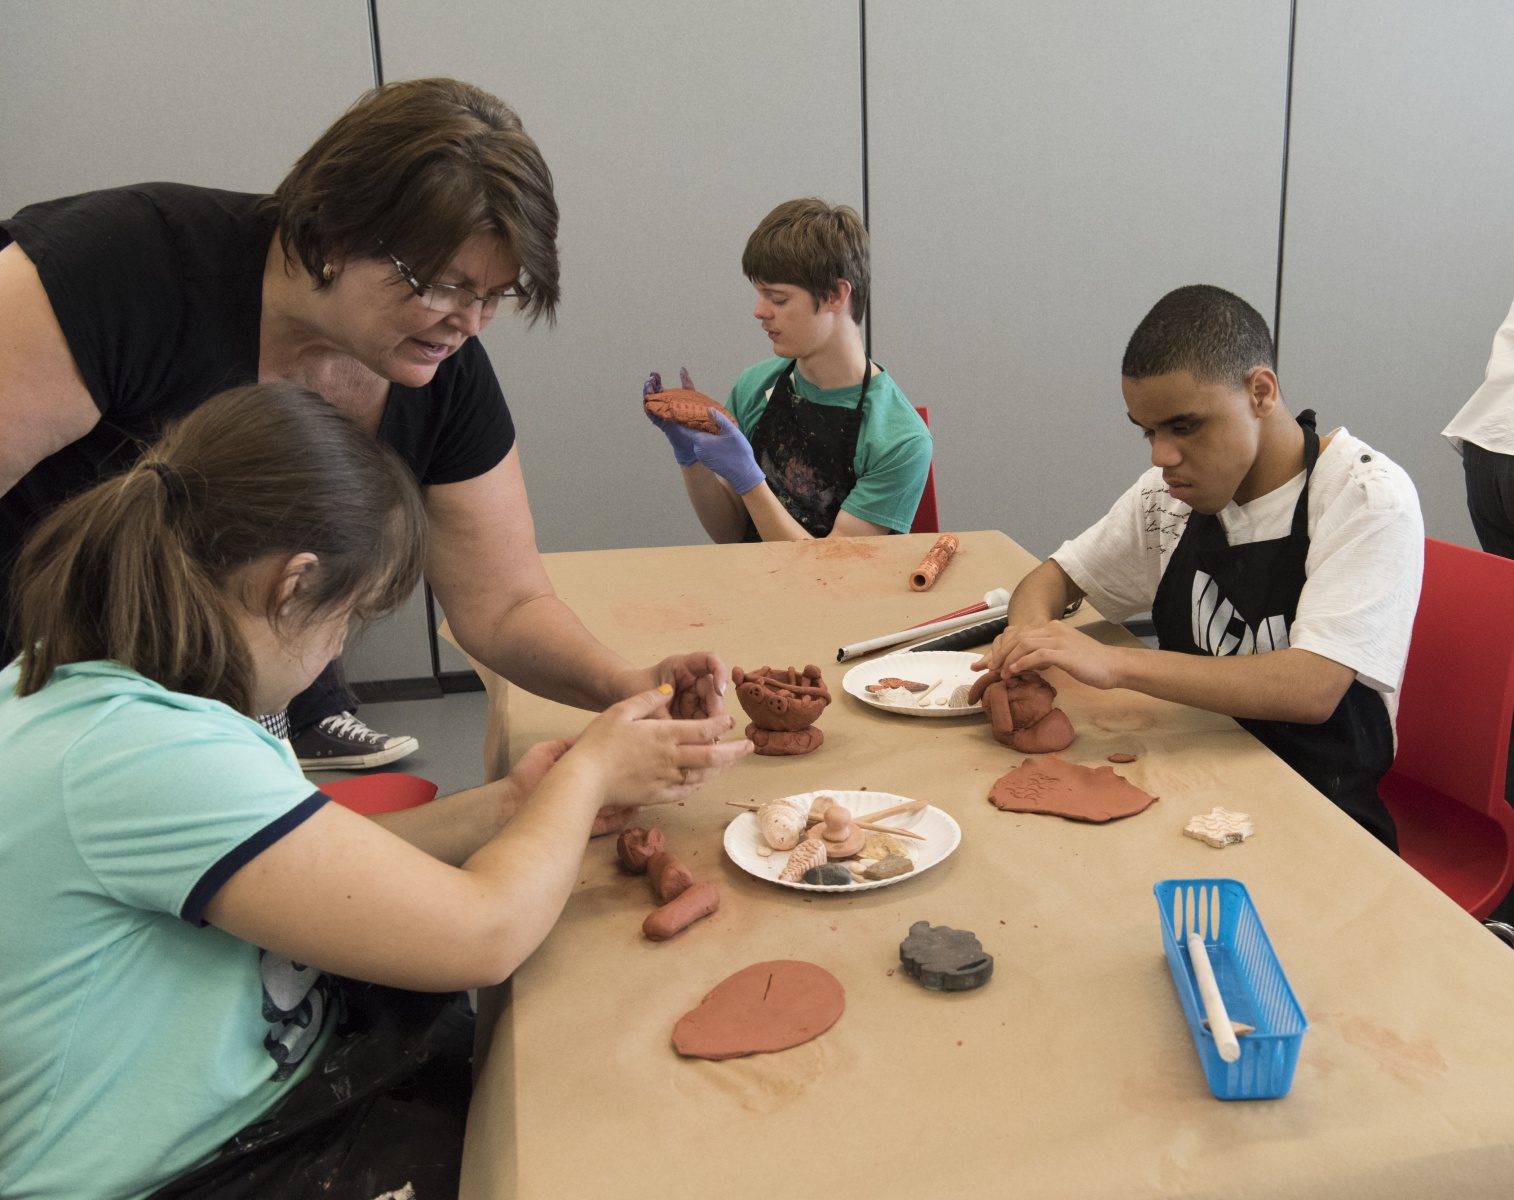 Three students sit at a table and work with clay with the help of a teacher.